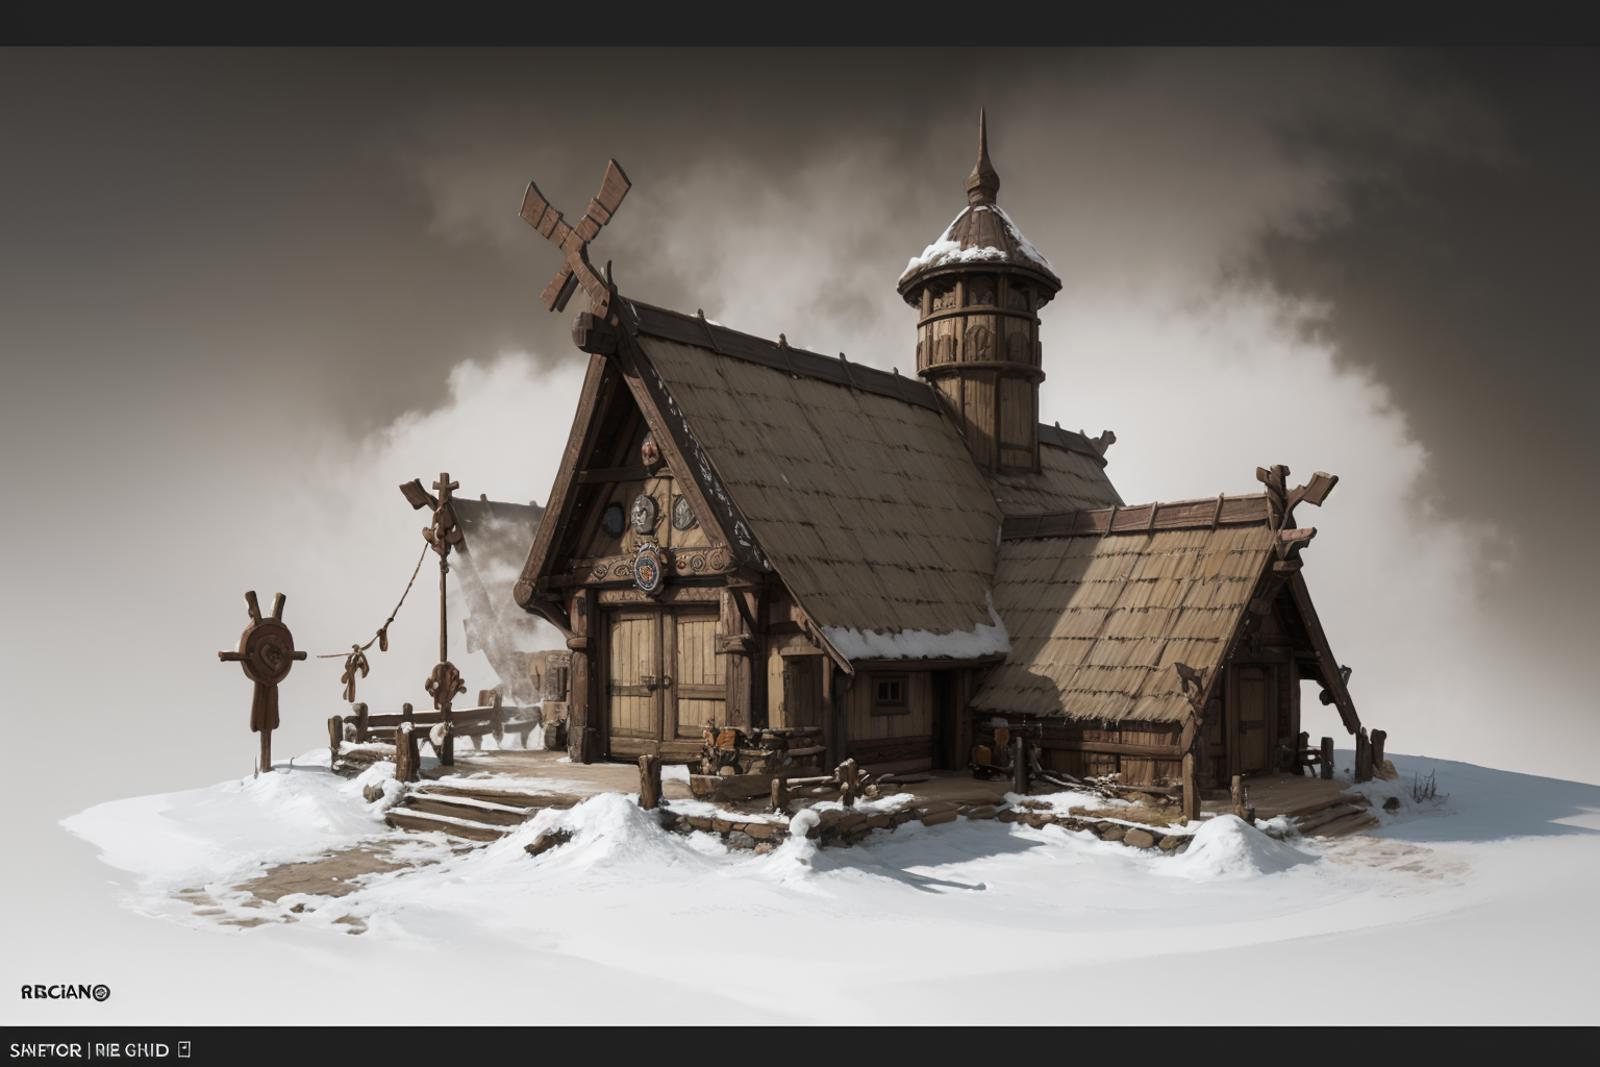 viking architecture.safetensors image by wrcui8649975